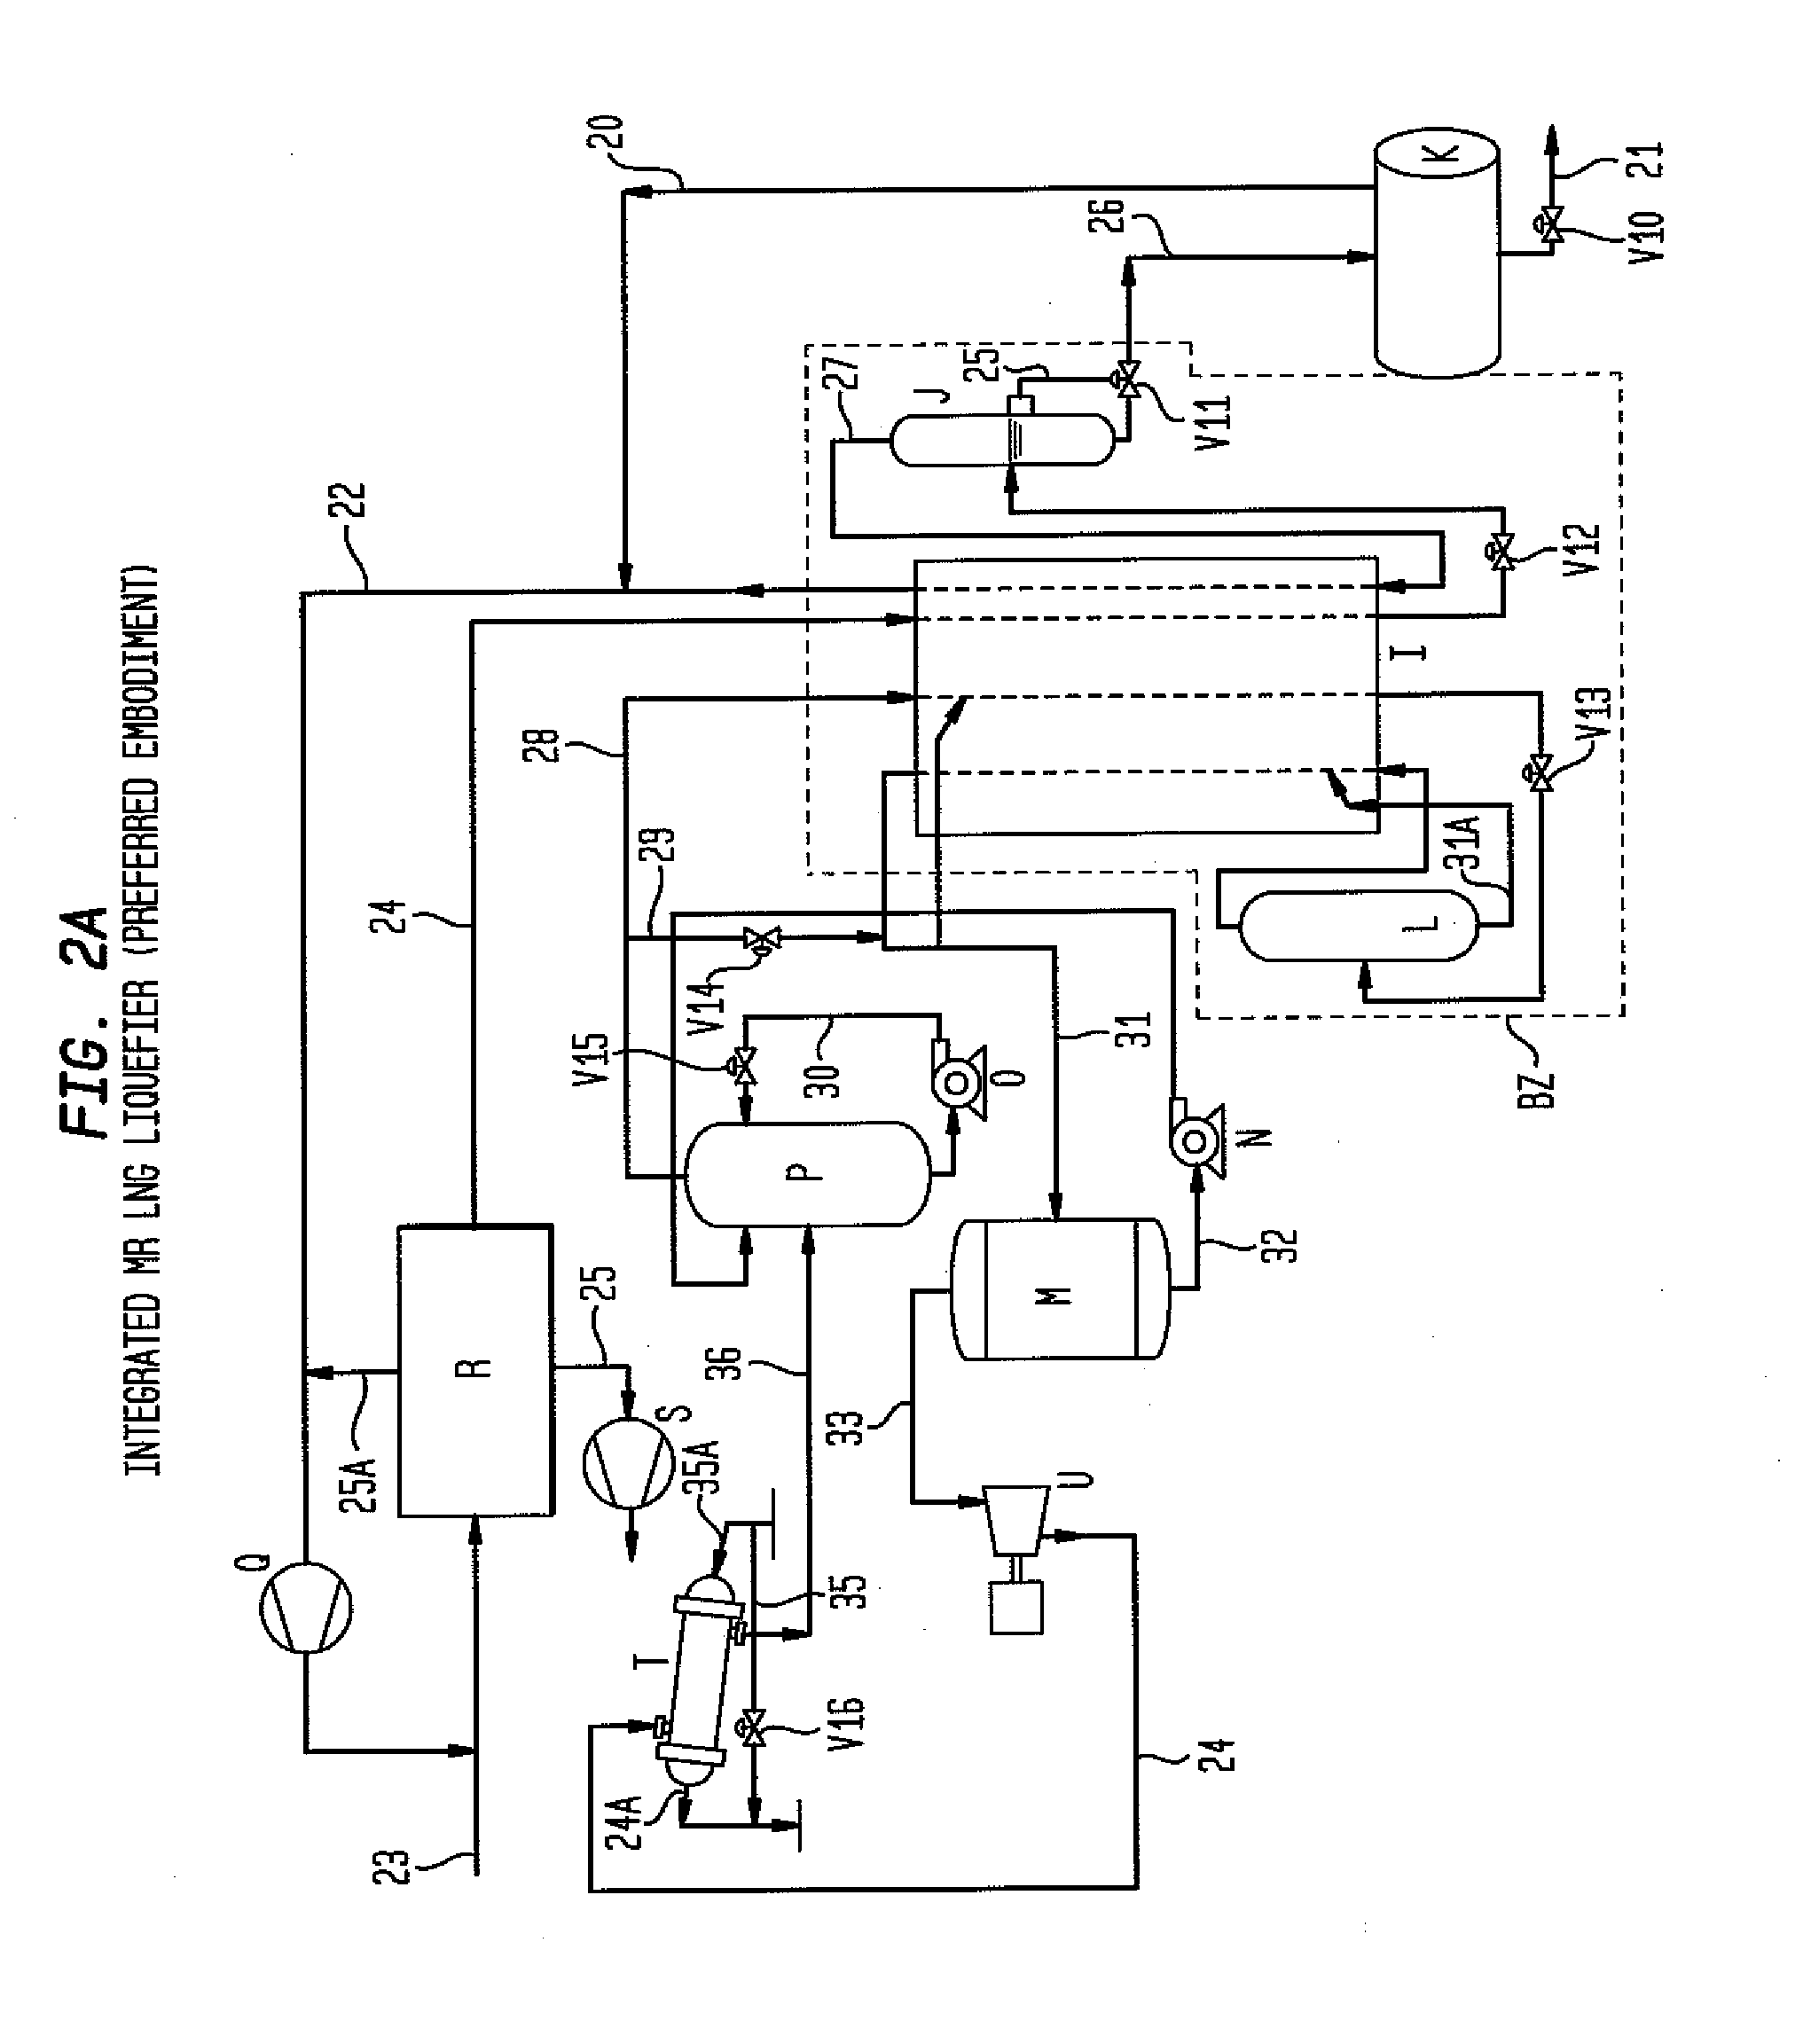 Nitrogen rejection and liquifier system for liquified natural gas production